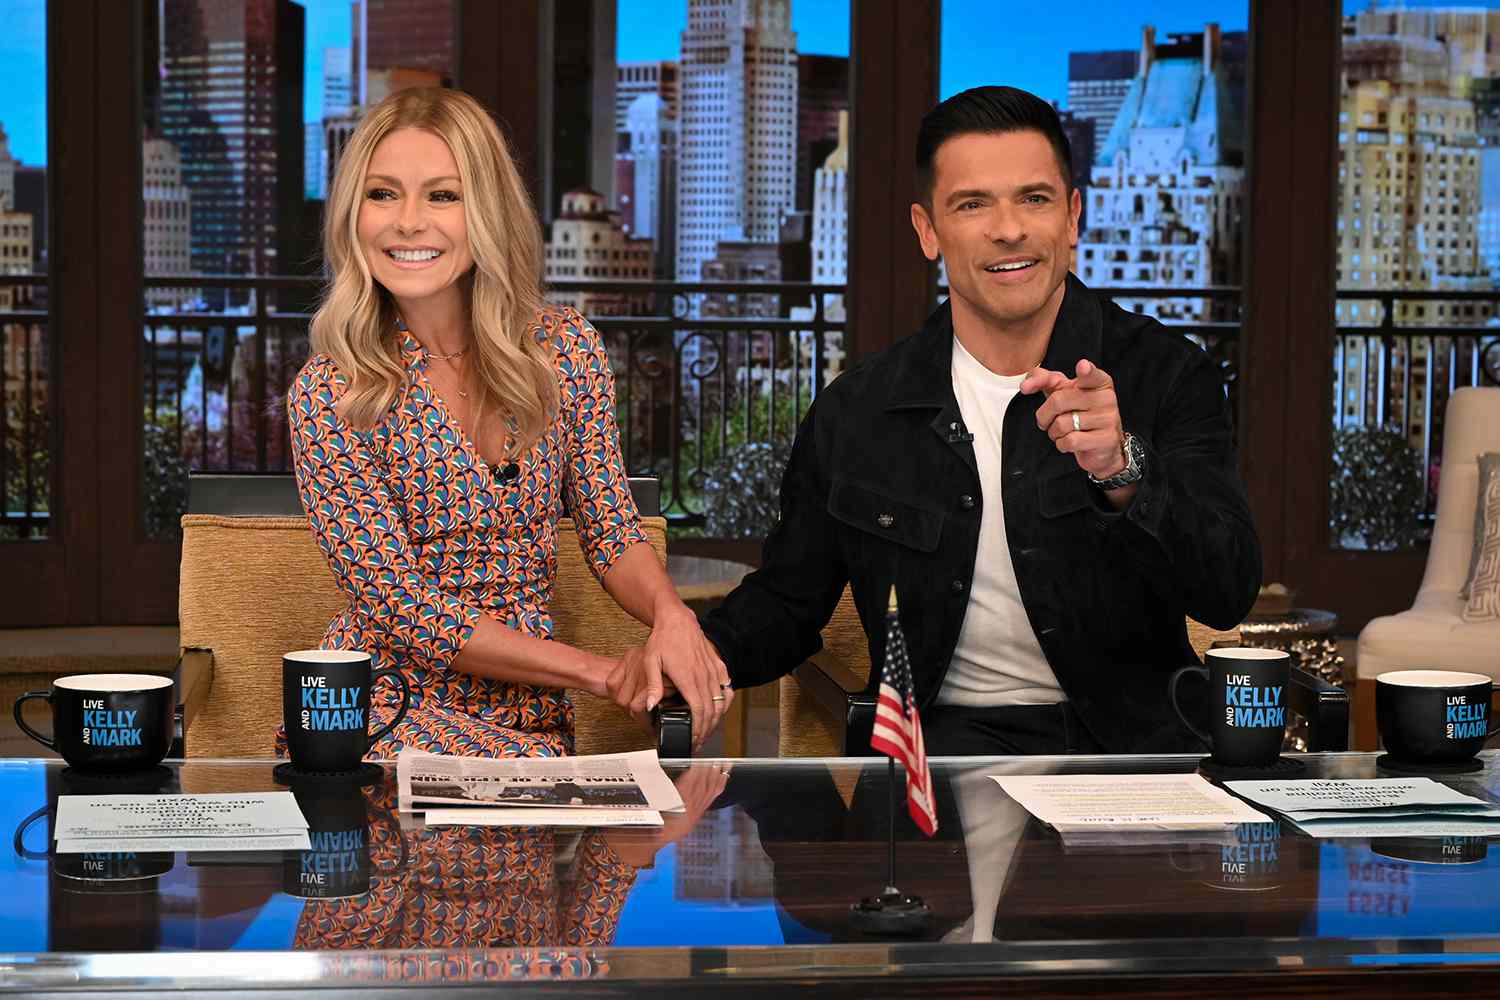 Mark Consuelos Playfully Scolds Live Audience Member for Talking During Show